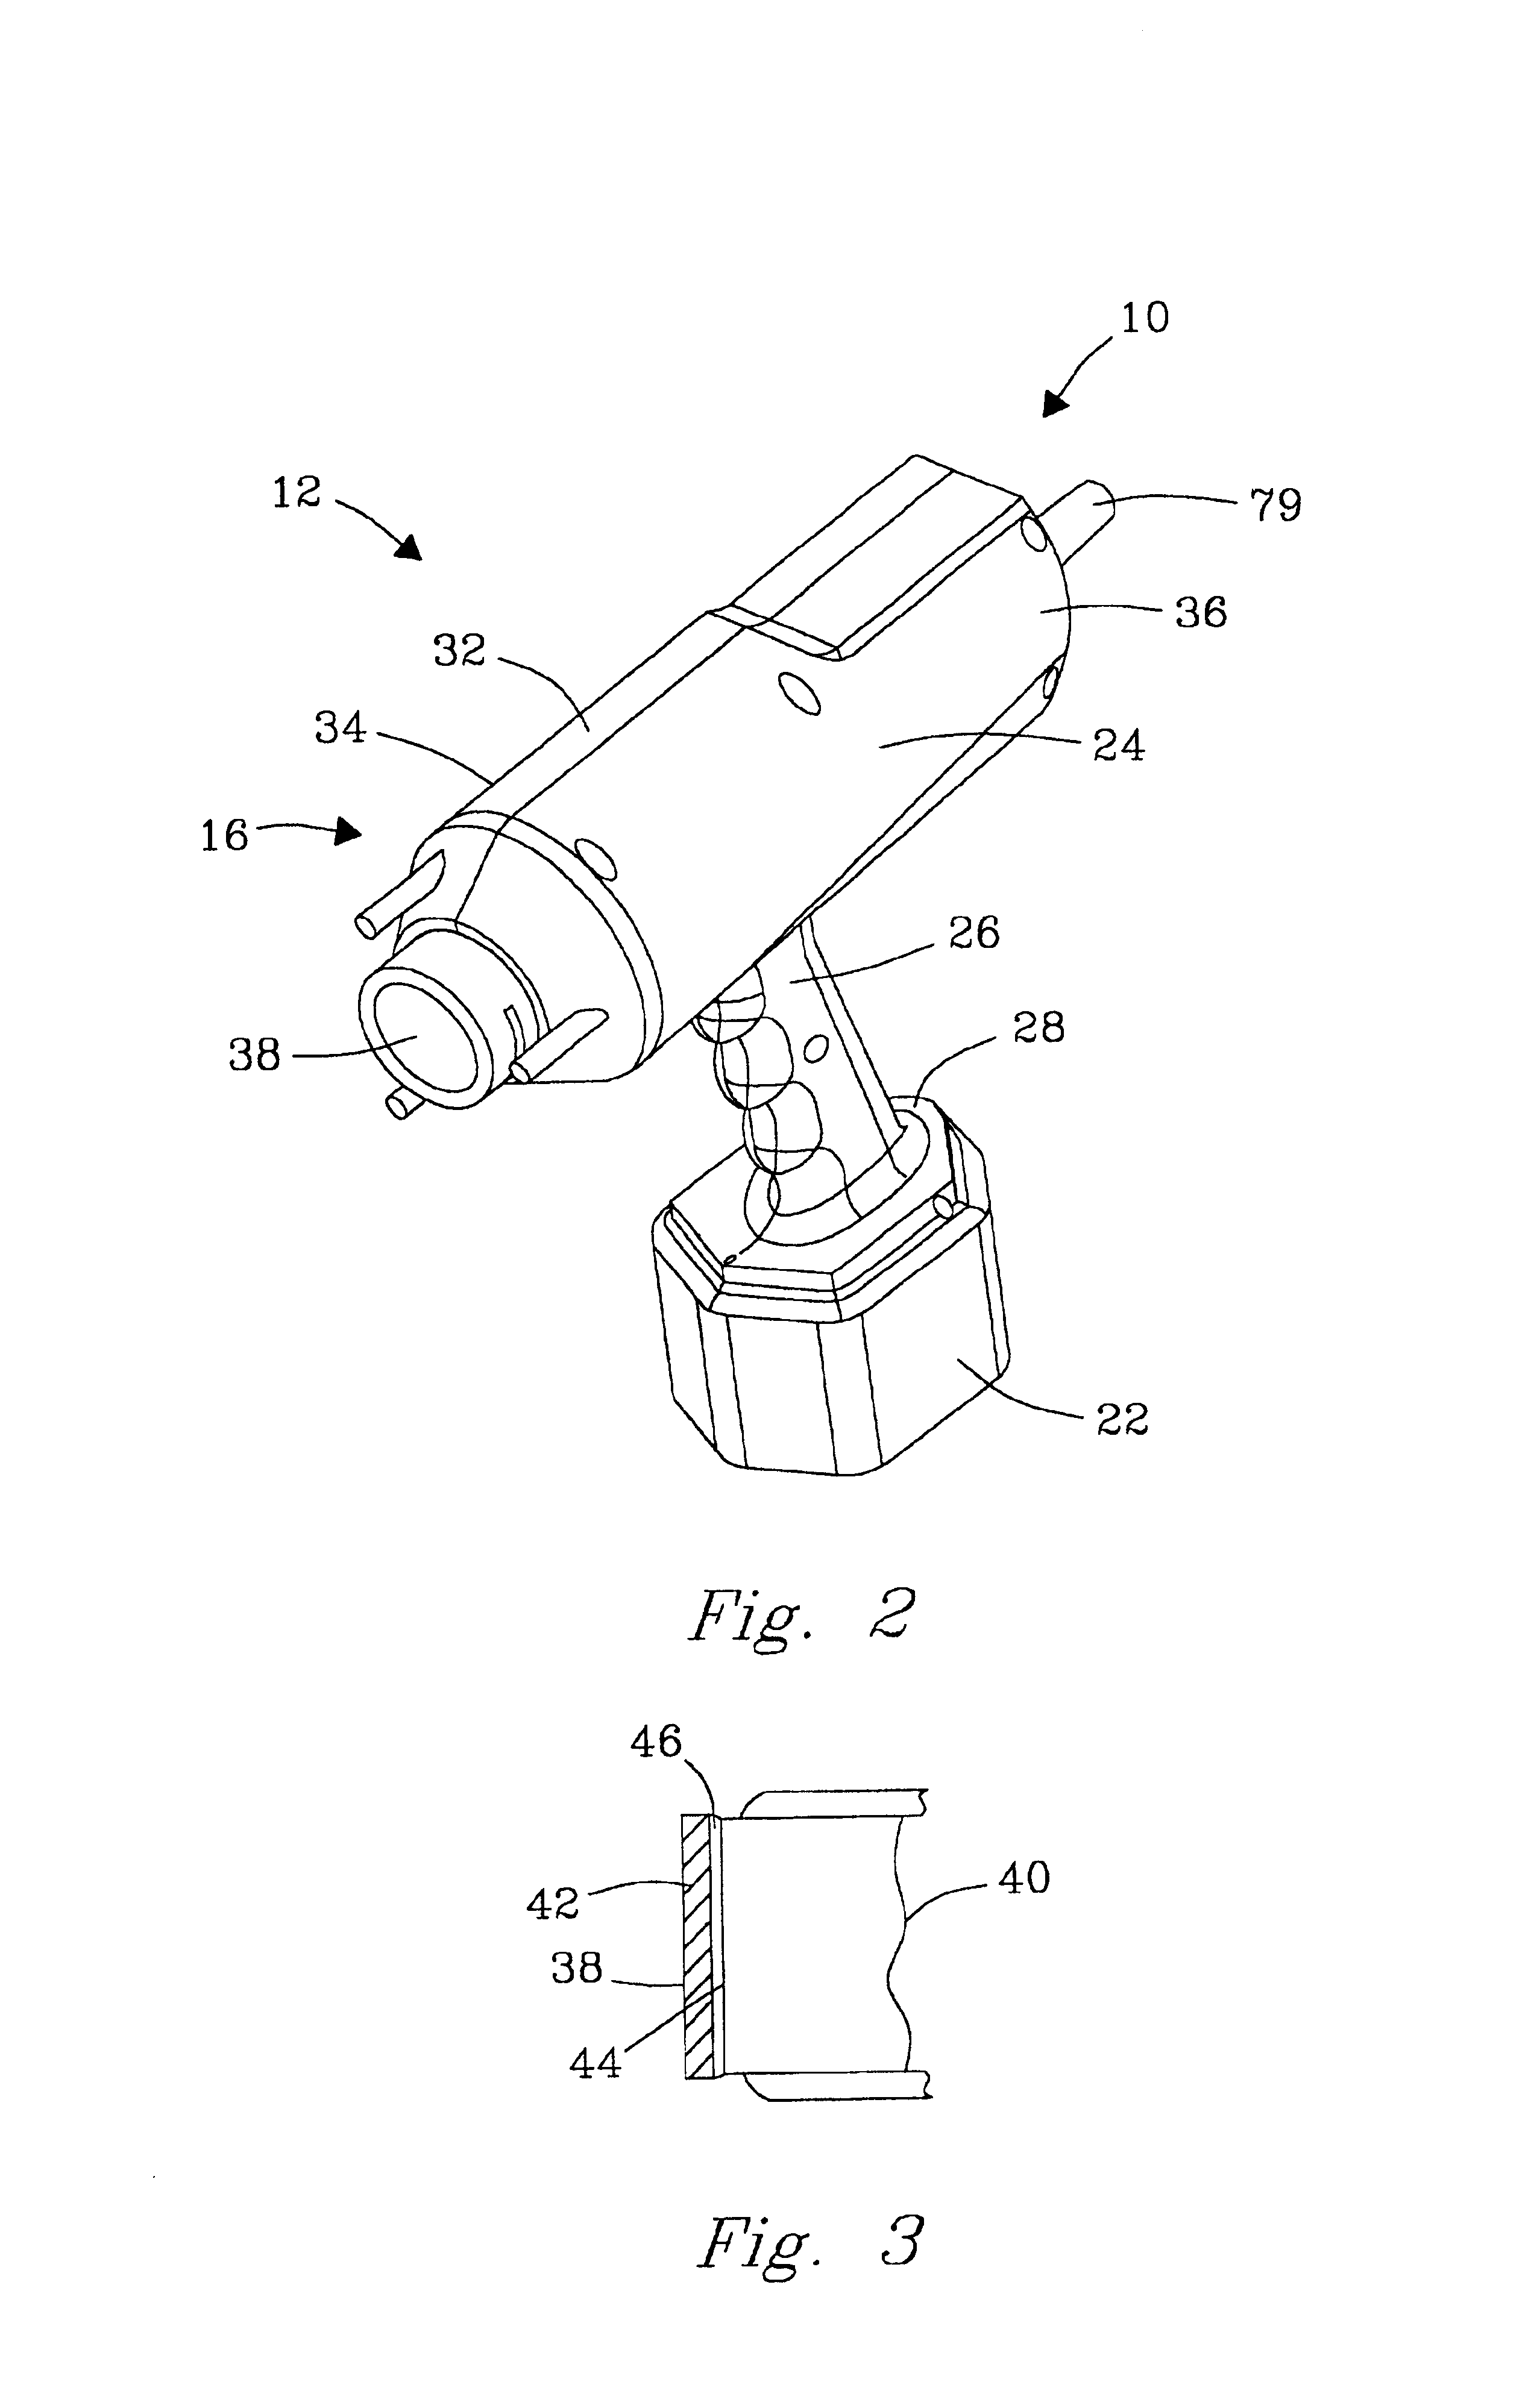 Acoustic inspection device